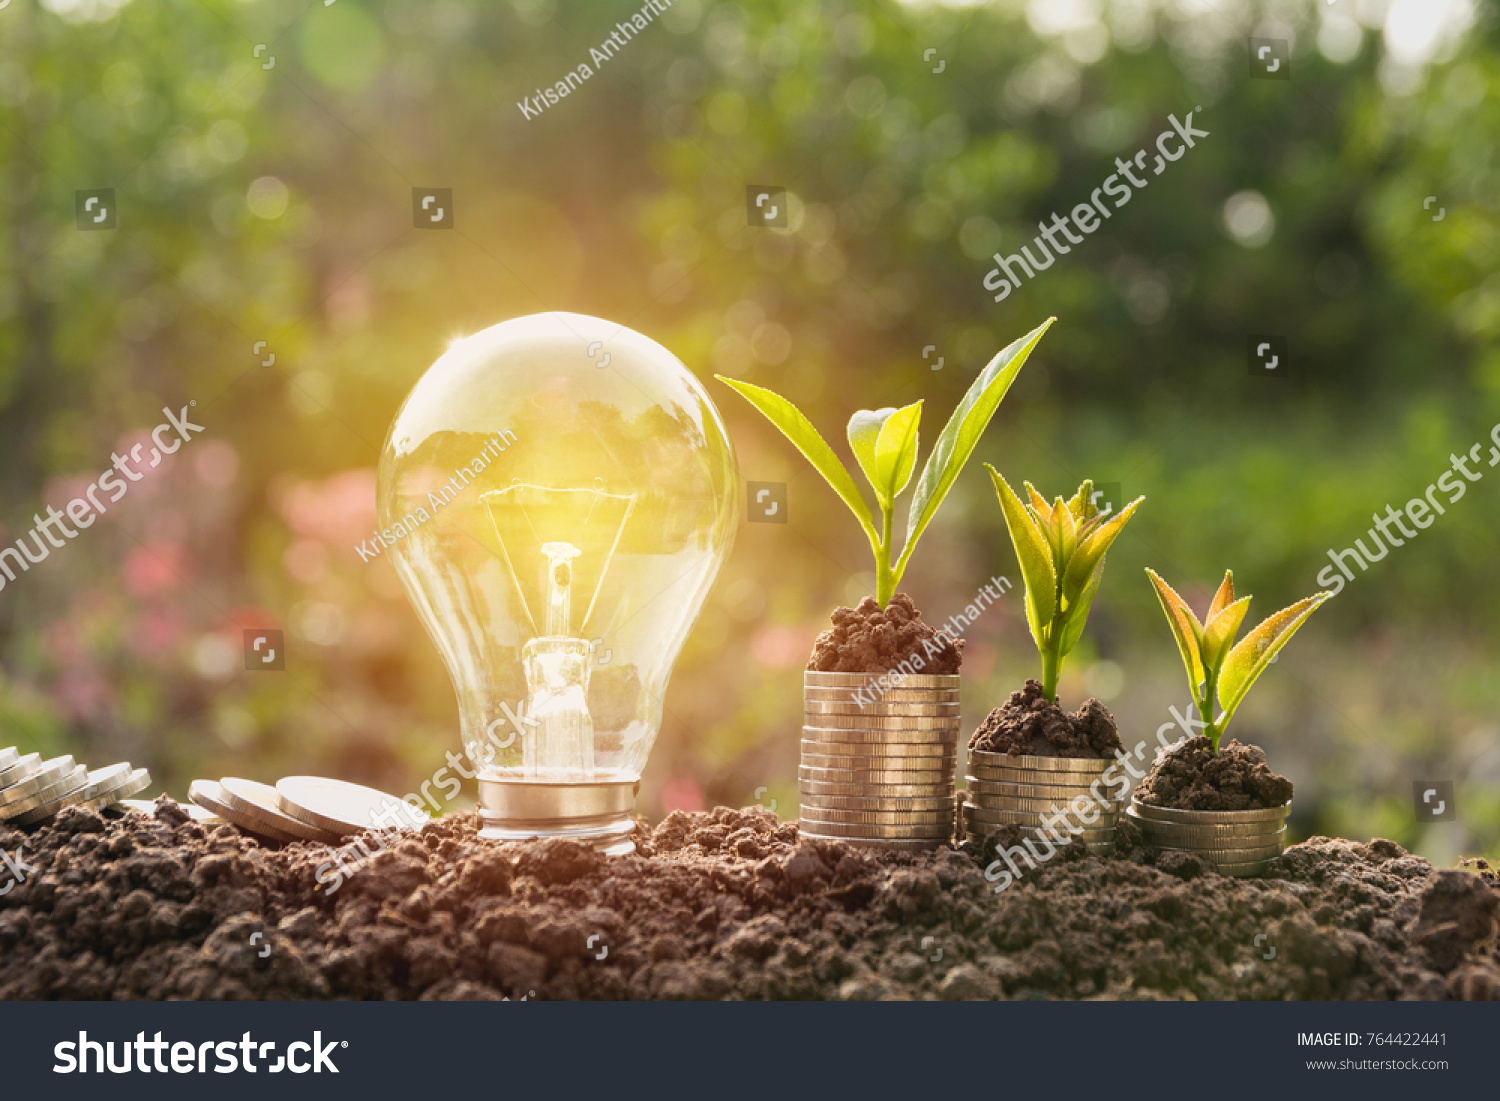 Energy saving light bulb and tree growing on stacks of coins on nature background. Saving, accounting and financial concept. #764422441